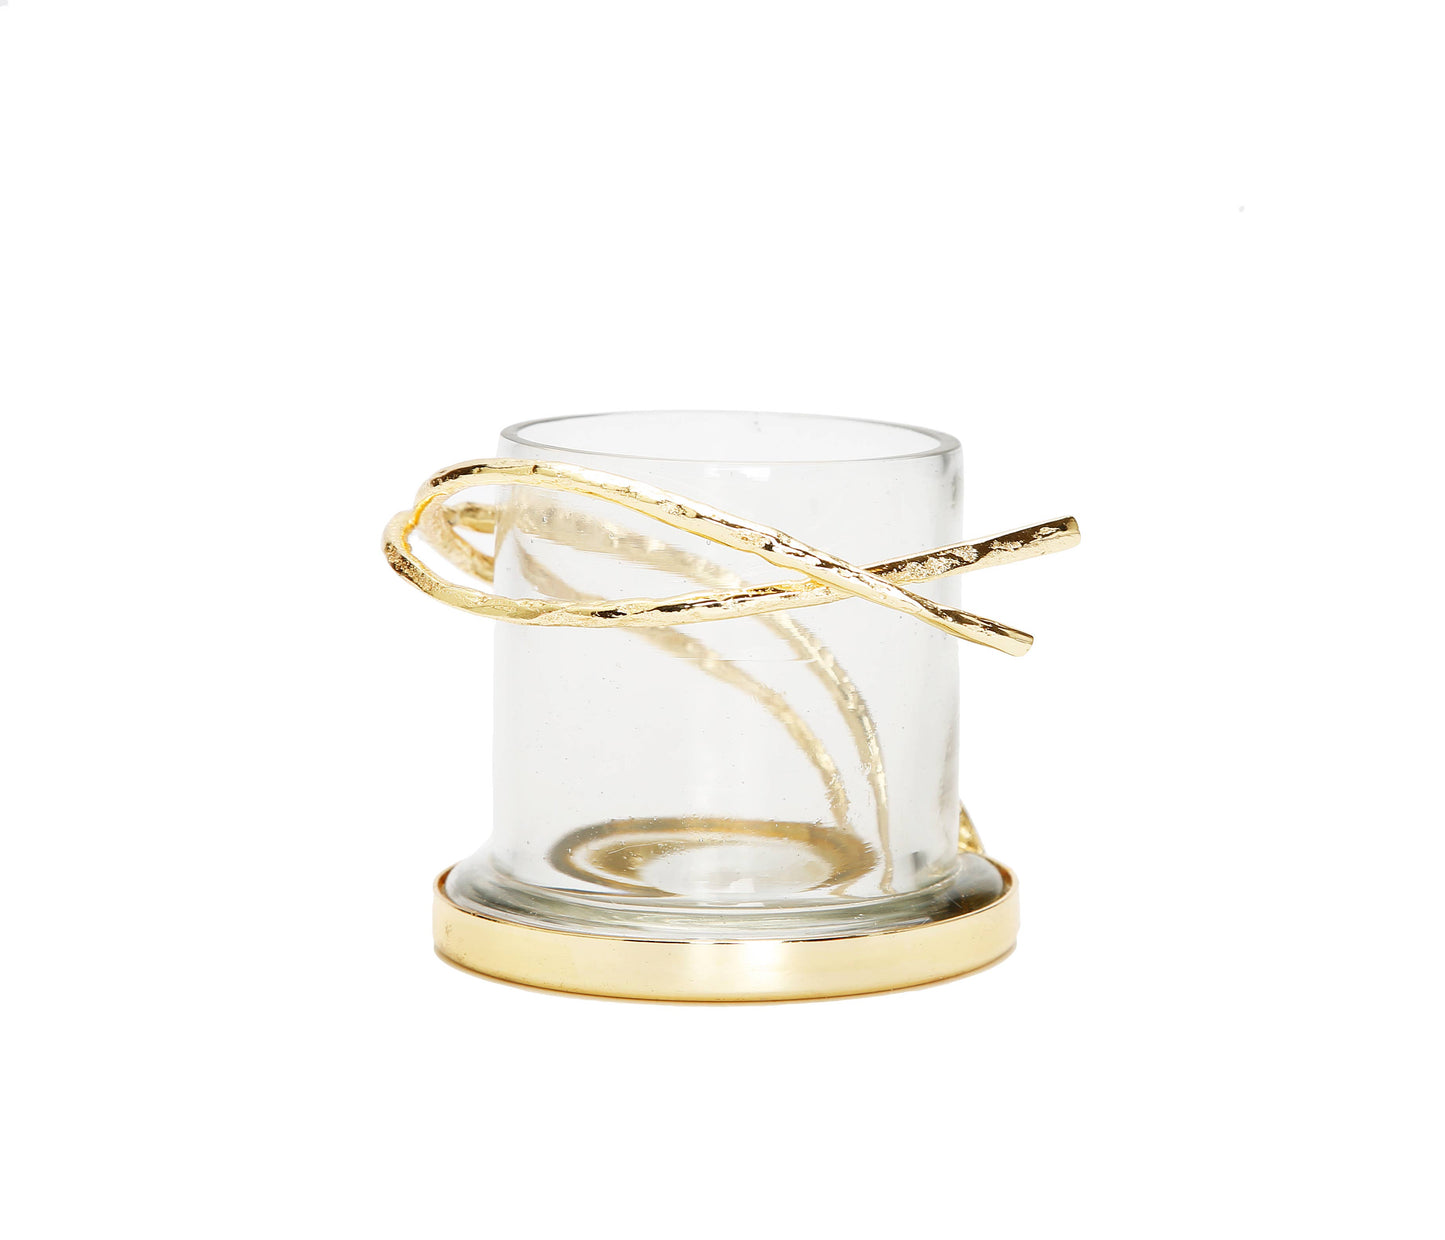 Glass Dome Match Holder with Gold Twig Design